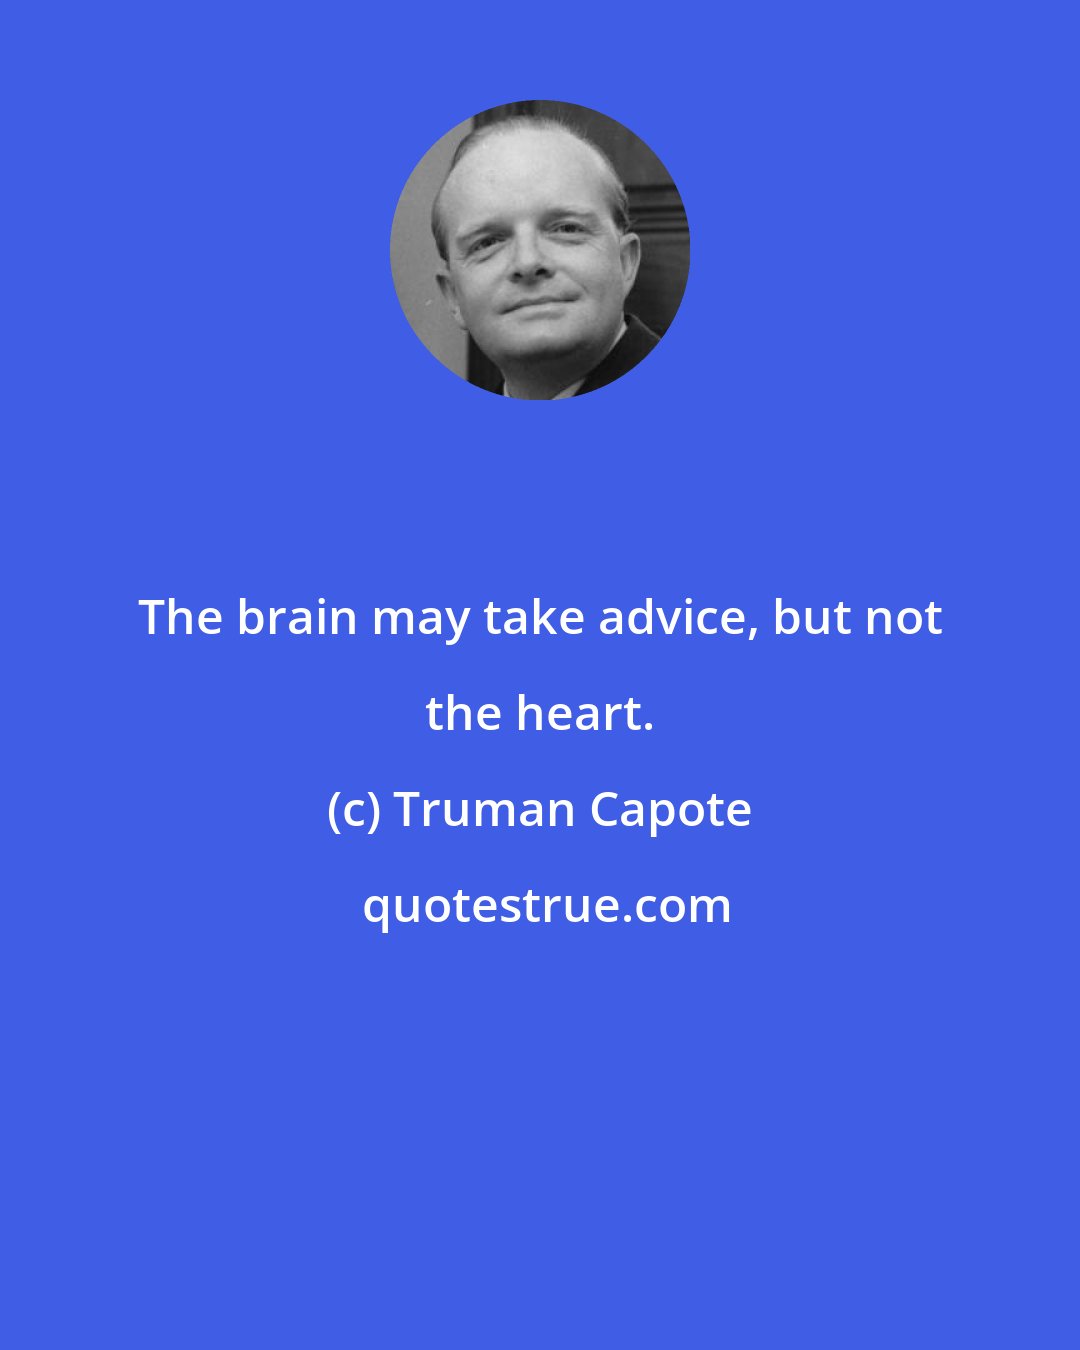 Truman Capote: The brain may take advice, but not the heart.